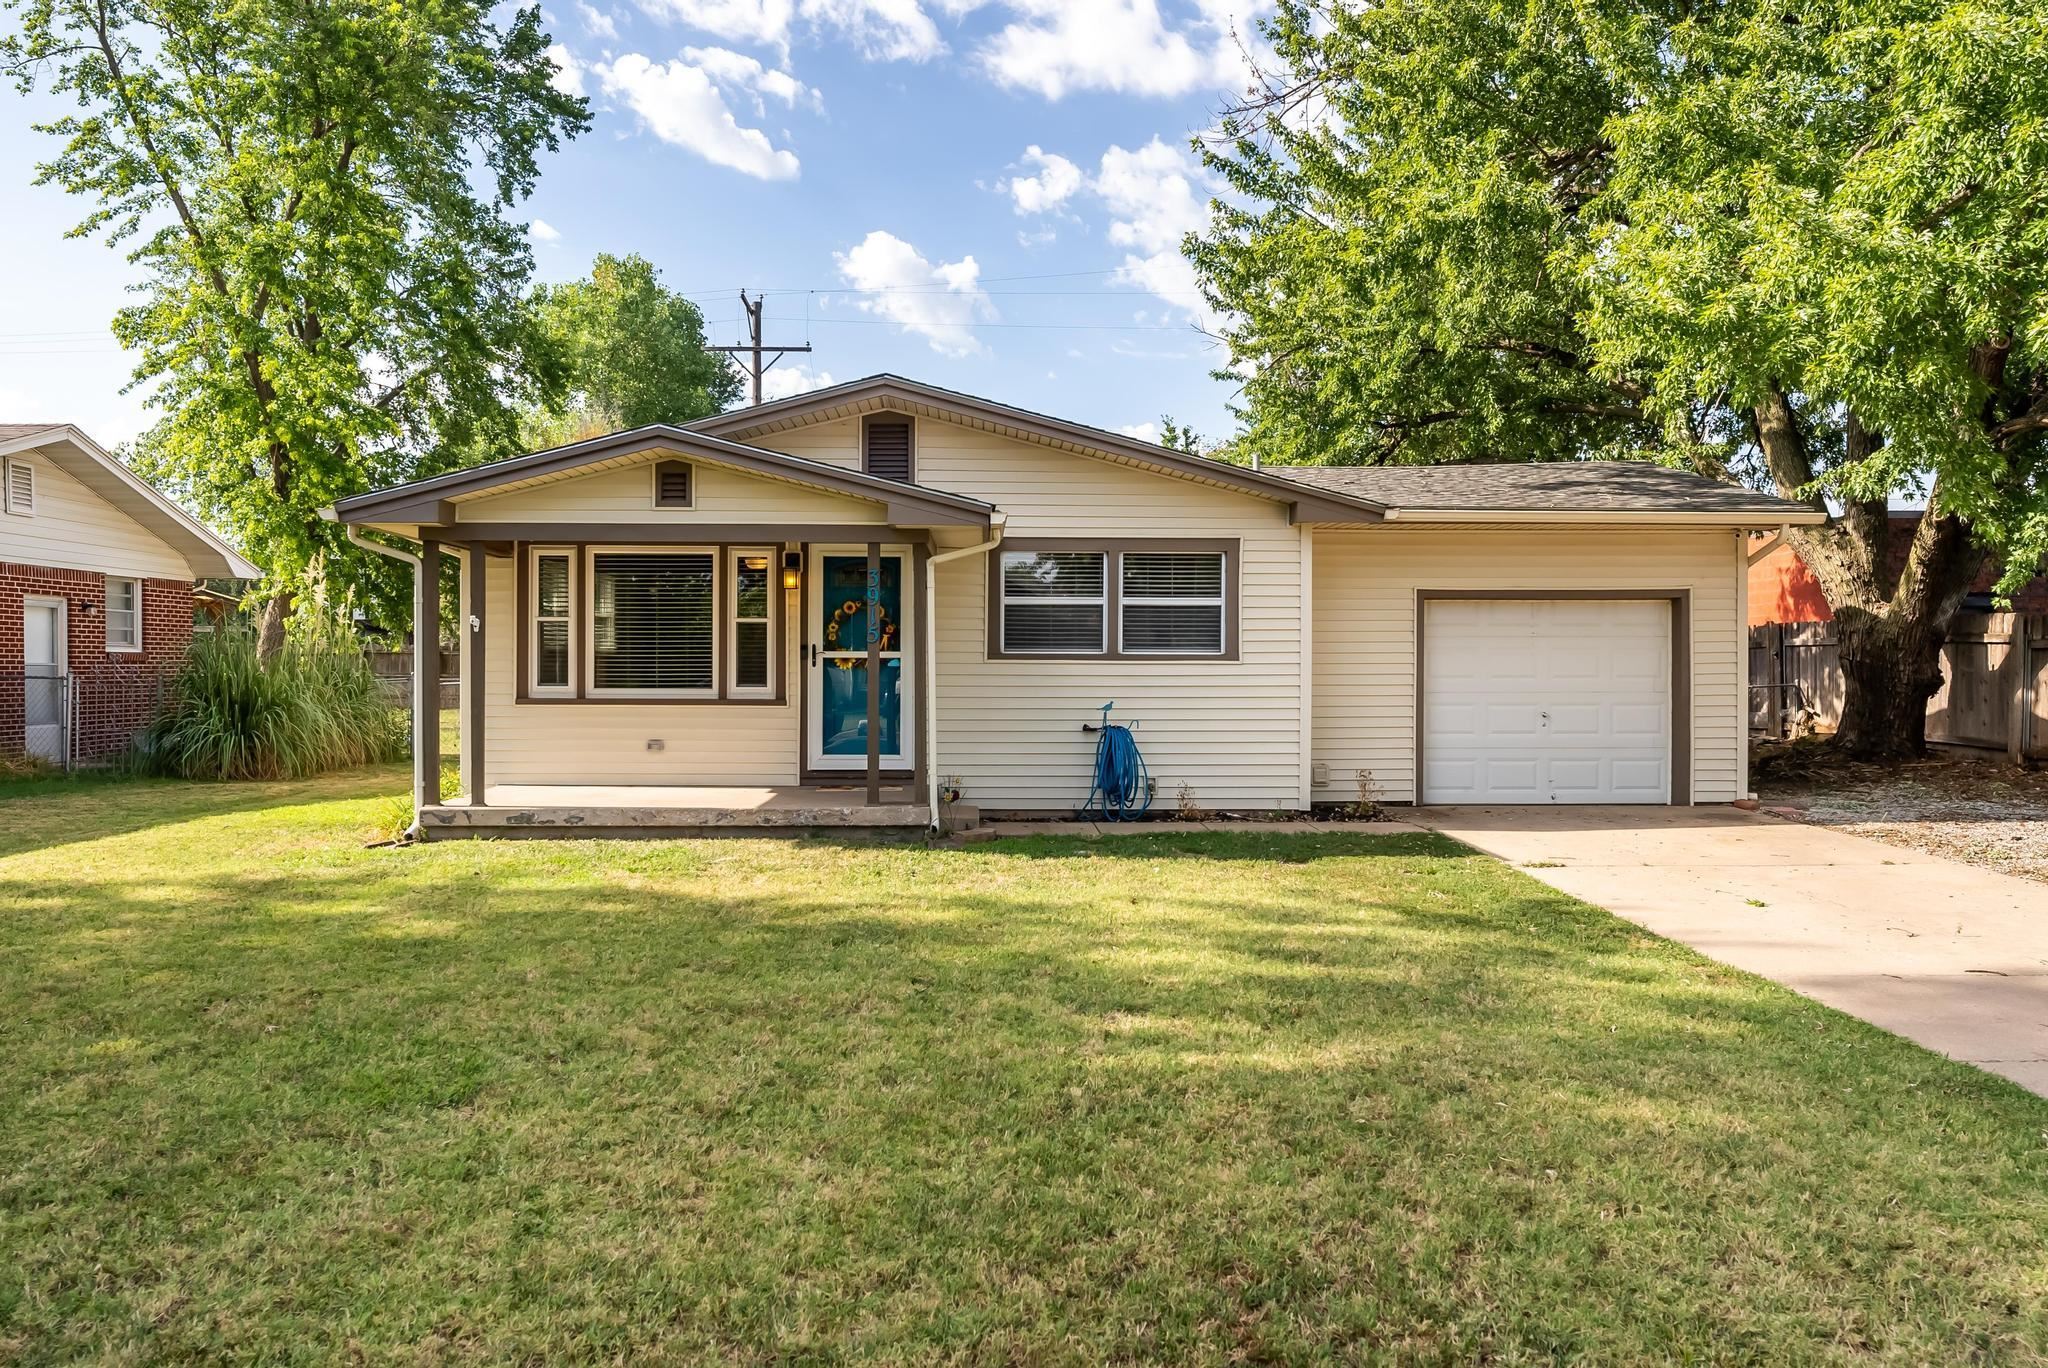 Darling, ranch style home that's move in ready is waiting for you to make it yours! This home featur